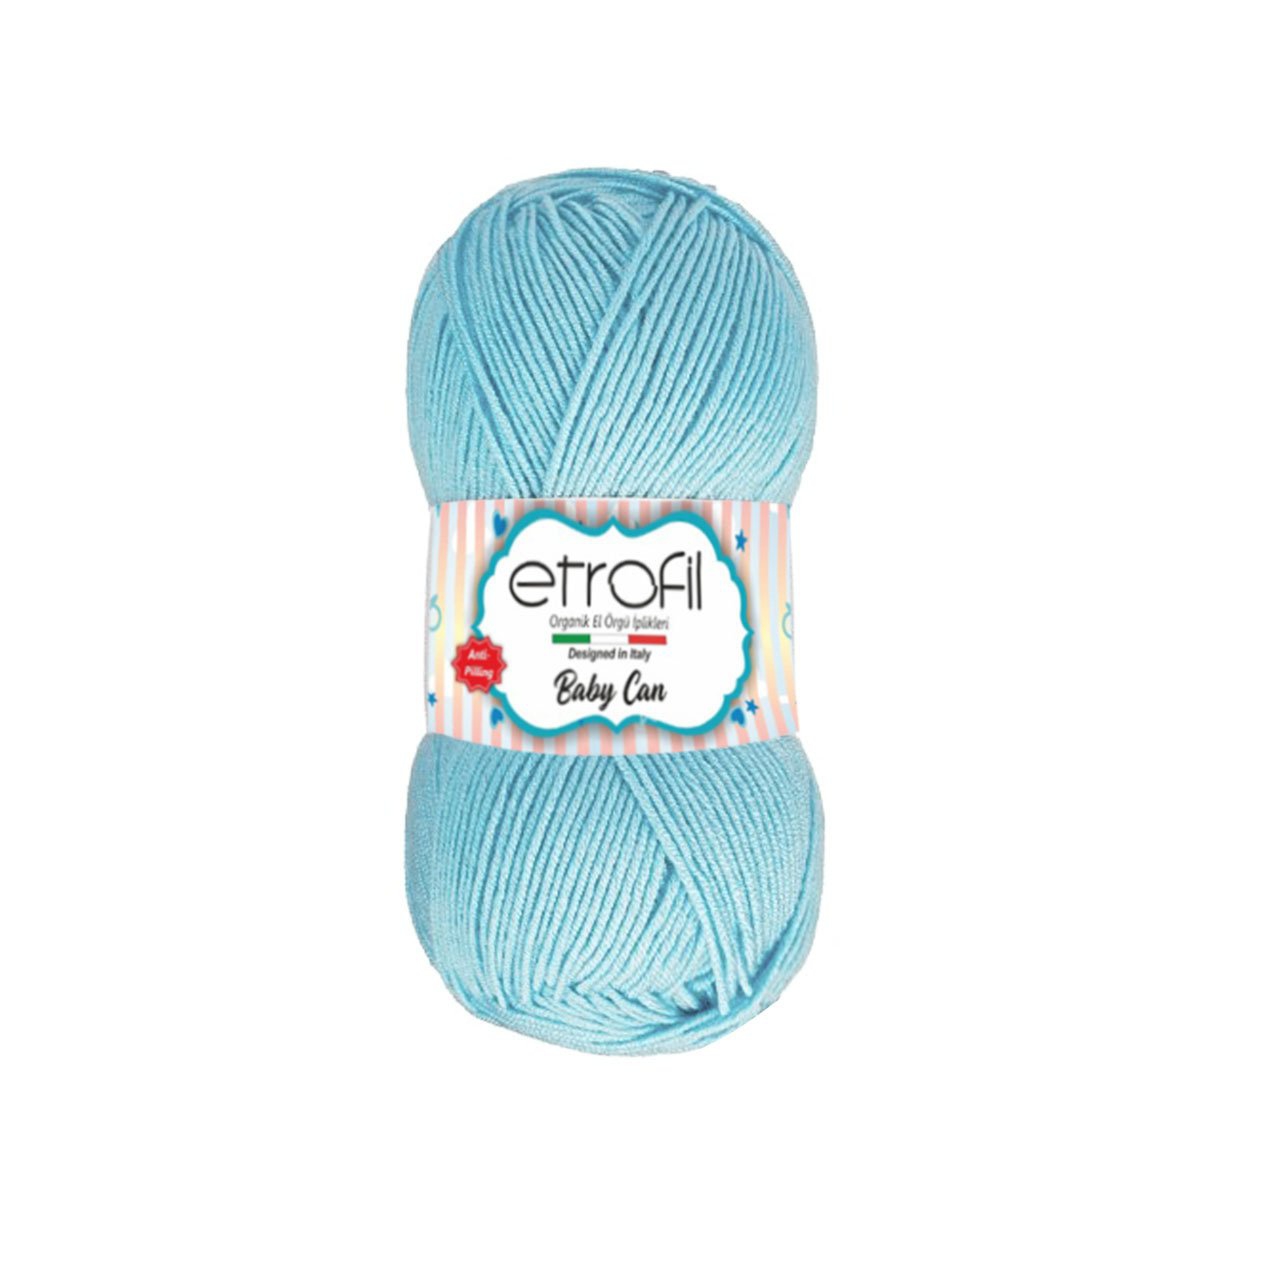 Etrofil Baby Can 80042